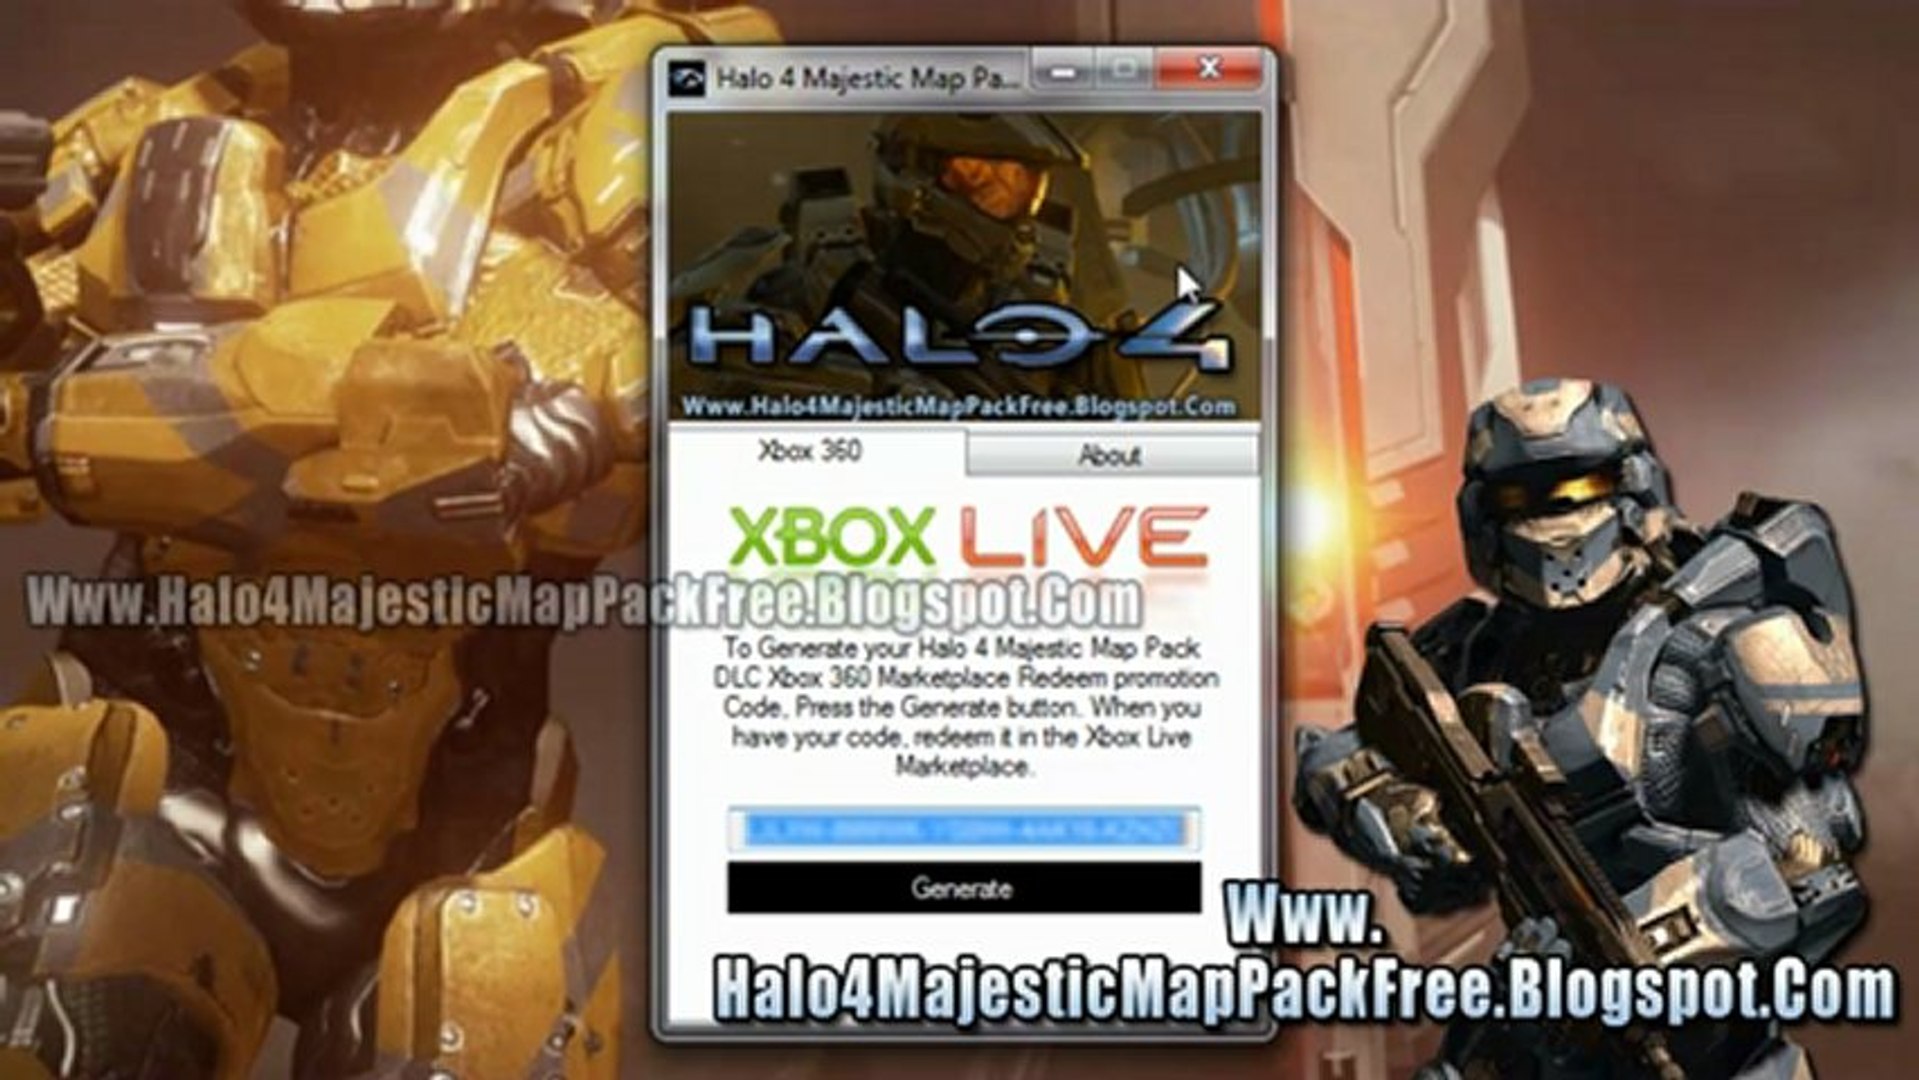 How To Download Halo 4 Majestic Map Pack DLC - video Dailymotion